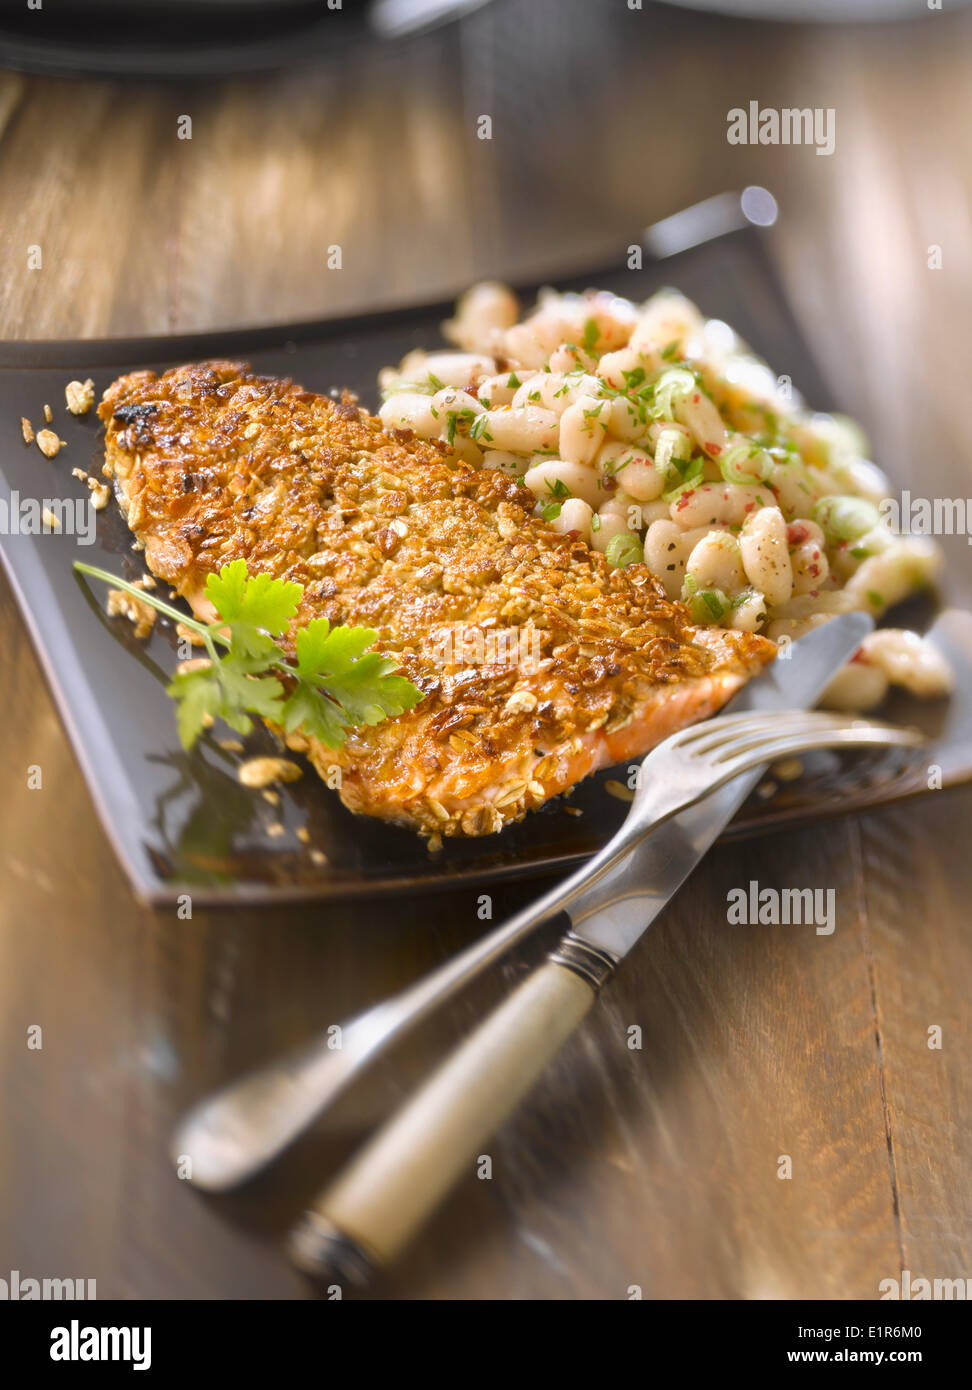 Trout fillet in cereal crust,white bean salad Stock Photo